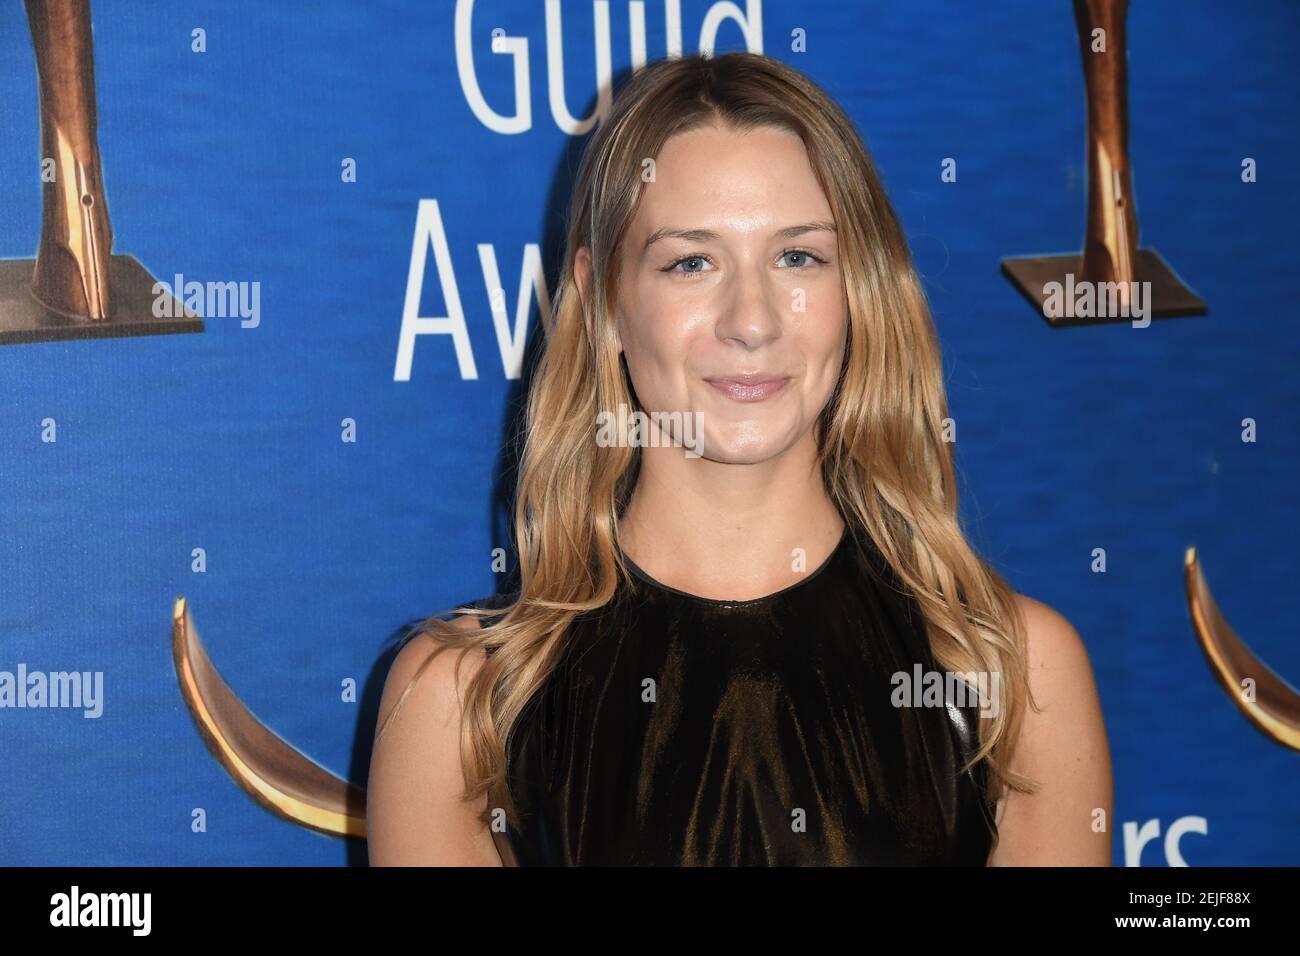 Alessandra Dimona walks the carpet at the 2020 Writers Guild Awards held at  the Beverly Hilton Hotel on February 1, 2020 in Beverly Hills, CA, USA.  (Photo by Sthanlee B. Mirador/Sipa USA